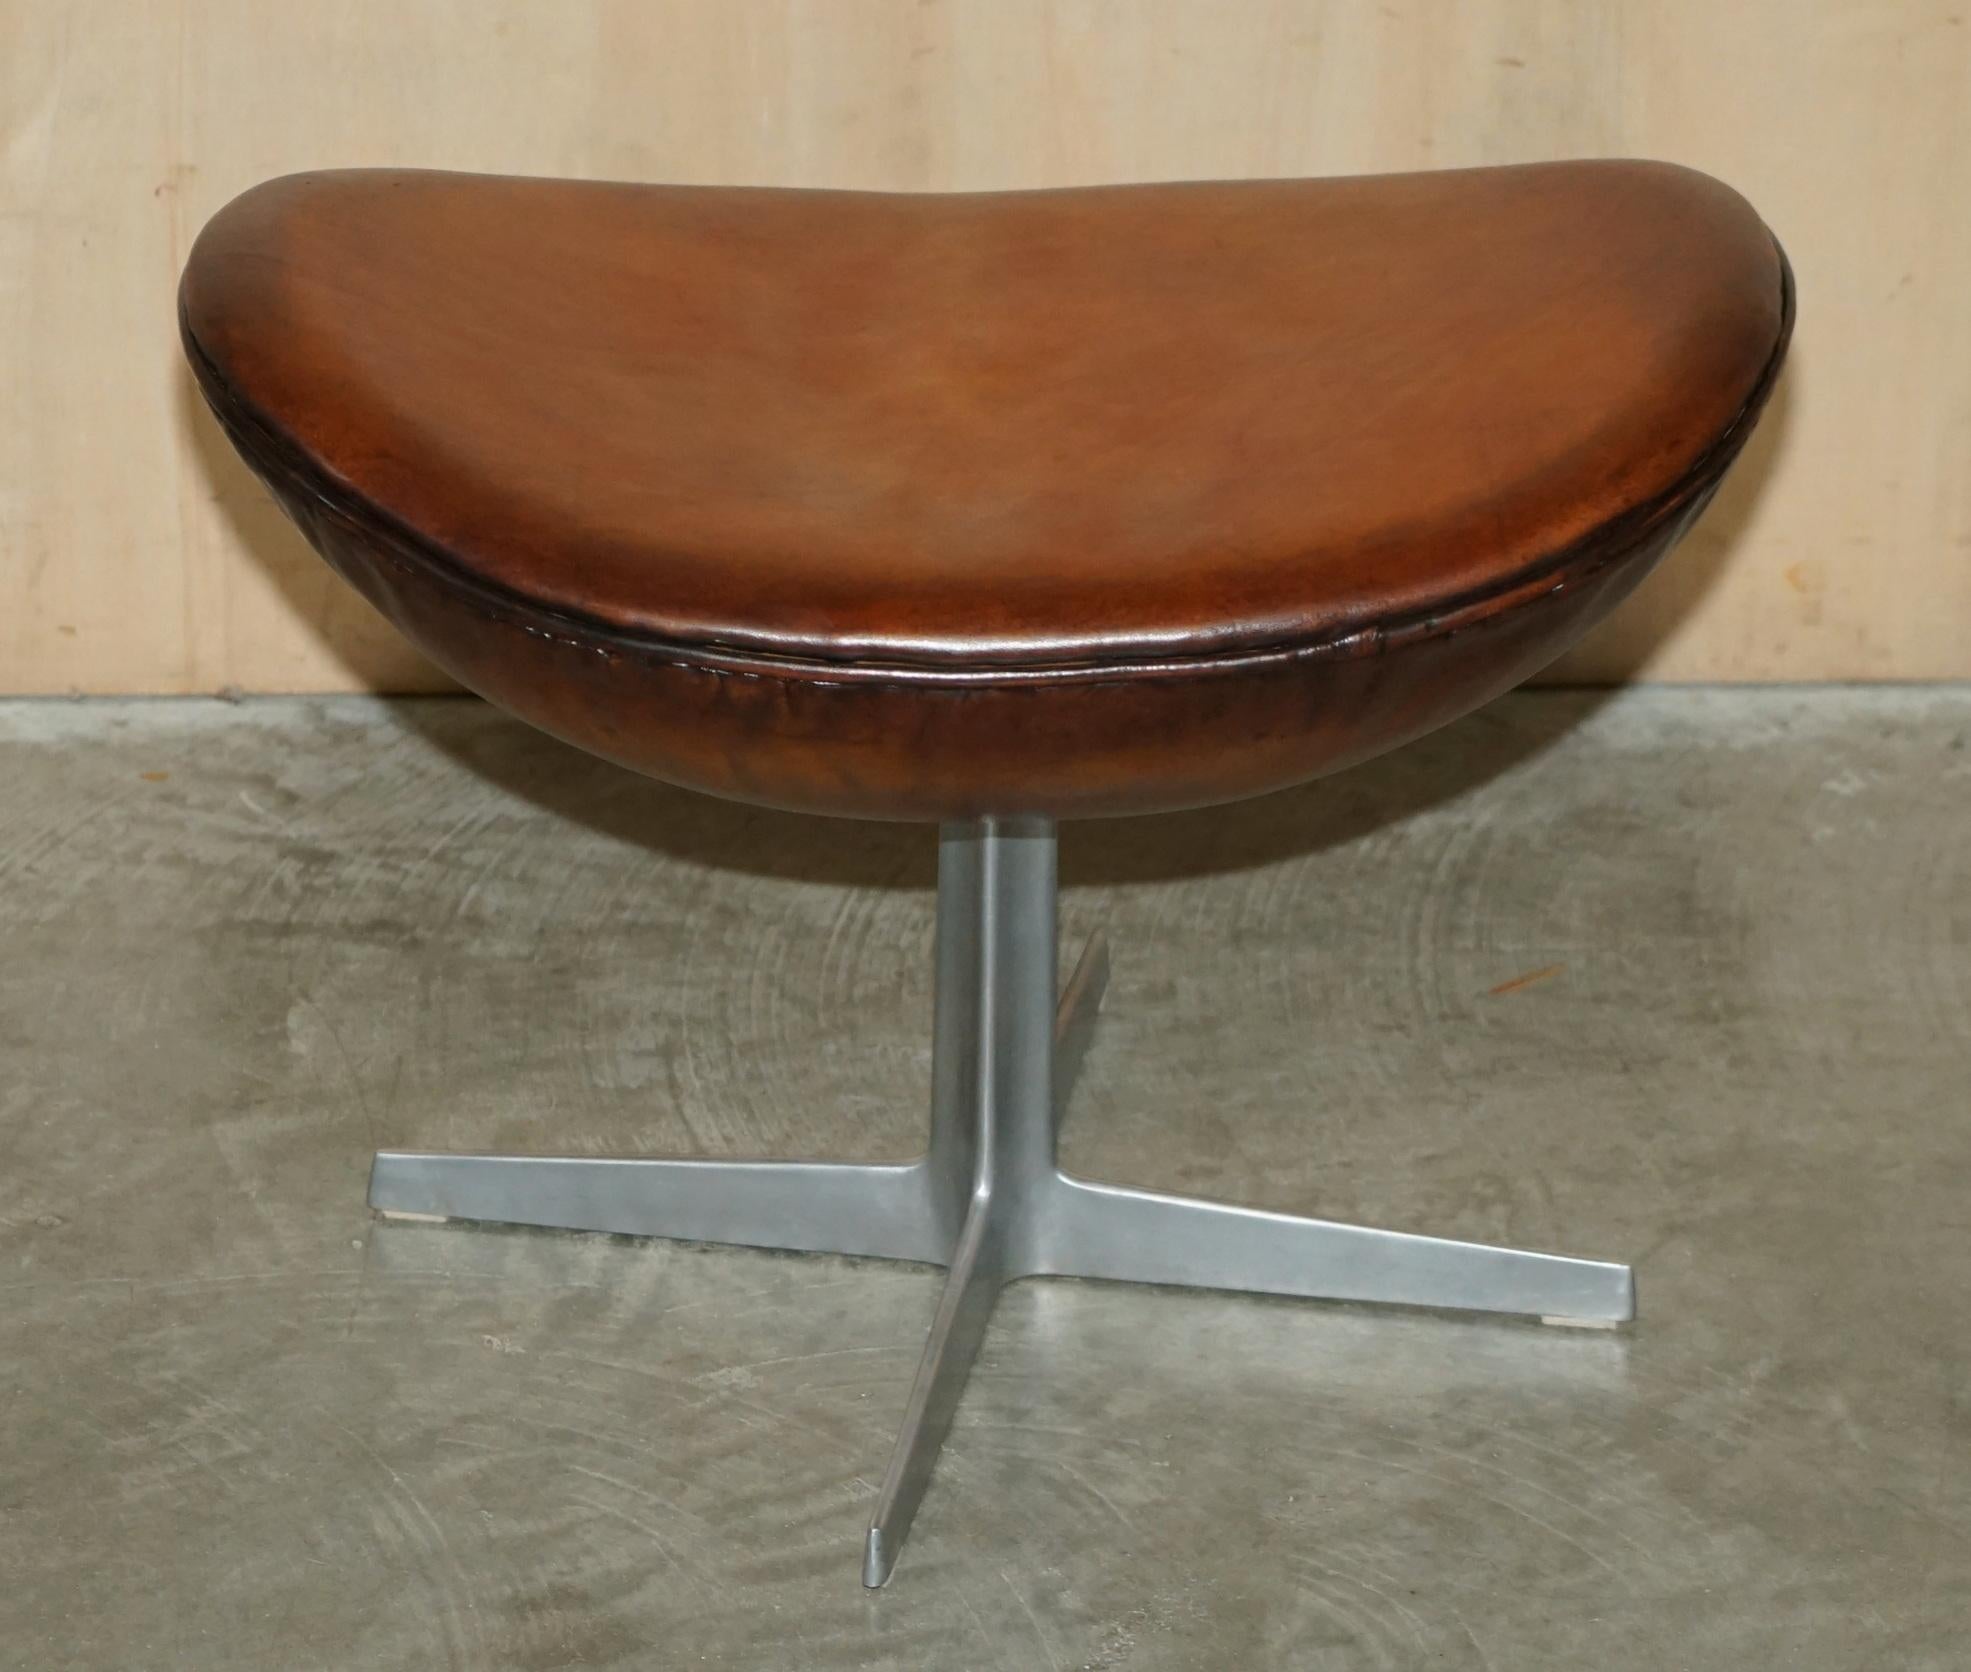 ORIGINAL FULLY RESTORED 1968 FRITZ HANSEN EGG CHAiR & FOOTSTOOL IN BROWN LEATHER For Sale 6